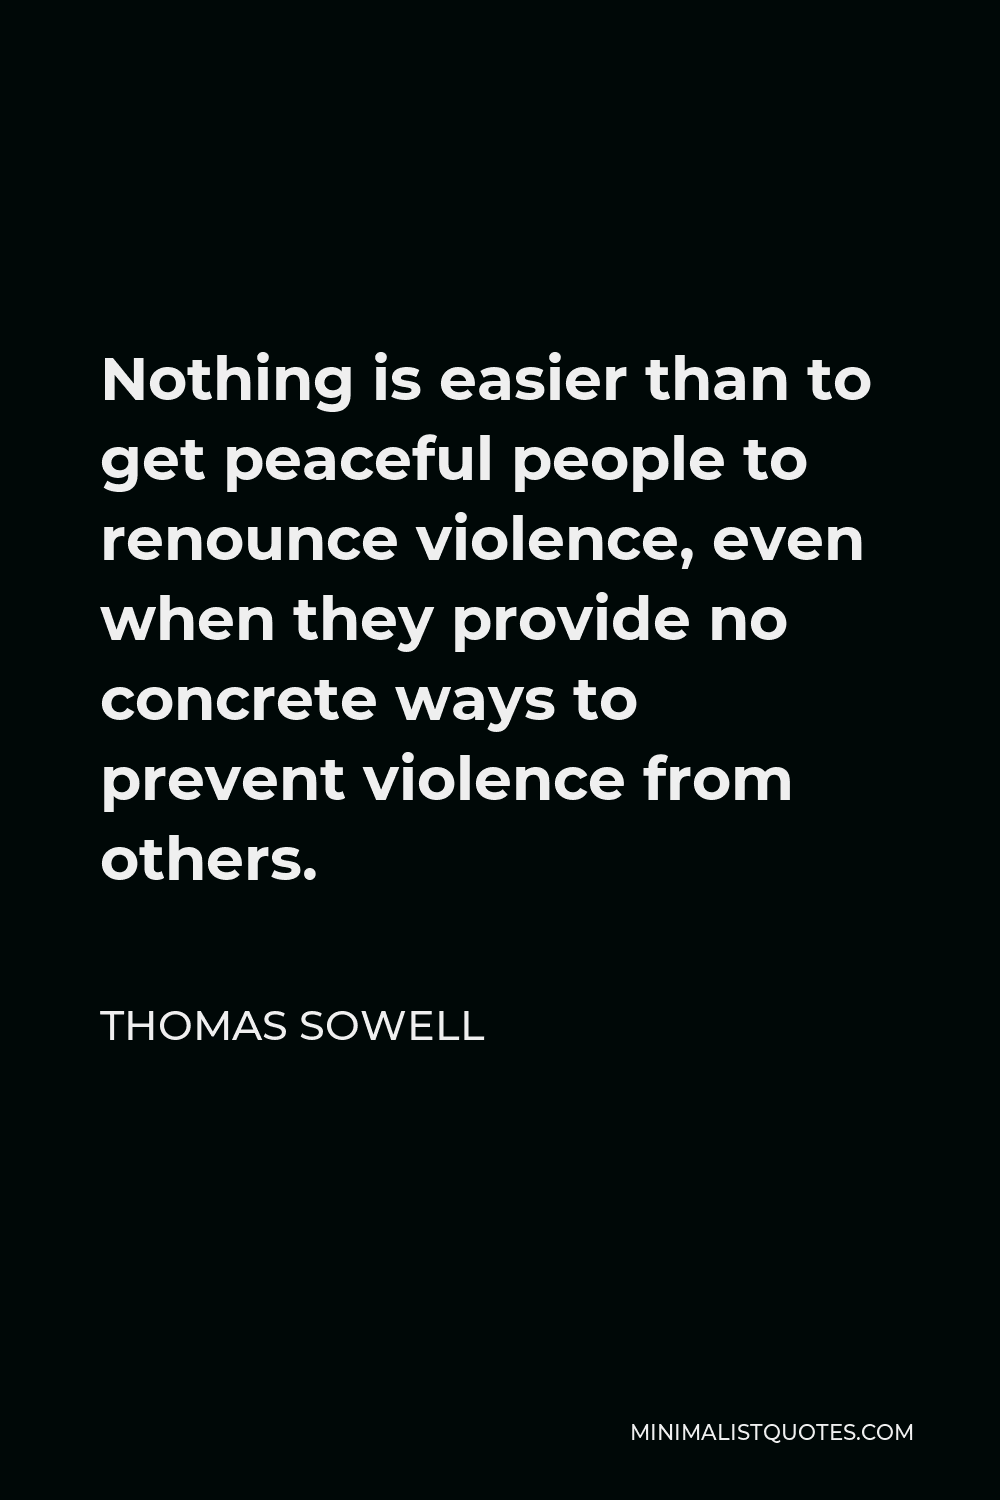 Thomas Sowell Quote - Nothing is easier than to get peaceful people to renounce violence, even when they provide no concrete ways to prevent violence from others.